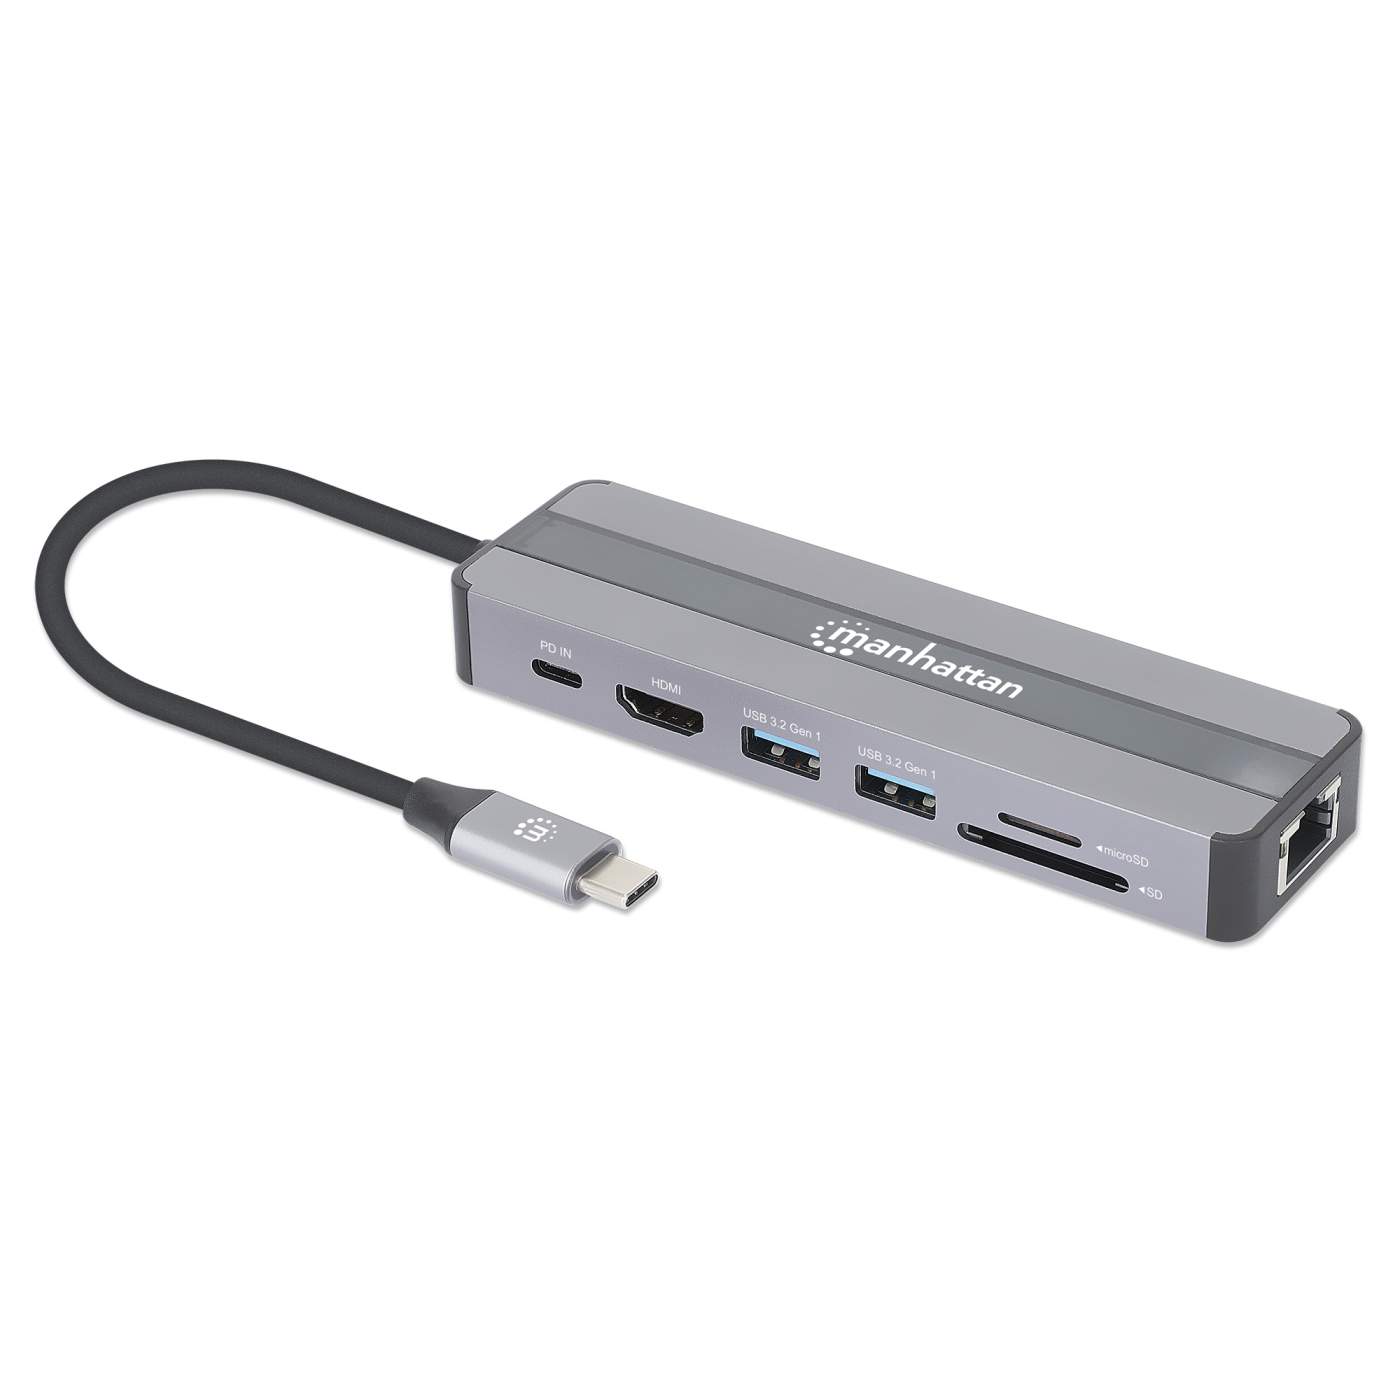 USB-C 7-in-1 Docking Station w/ Power Delivery (153928)